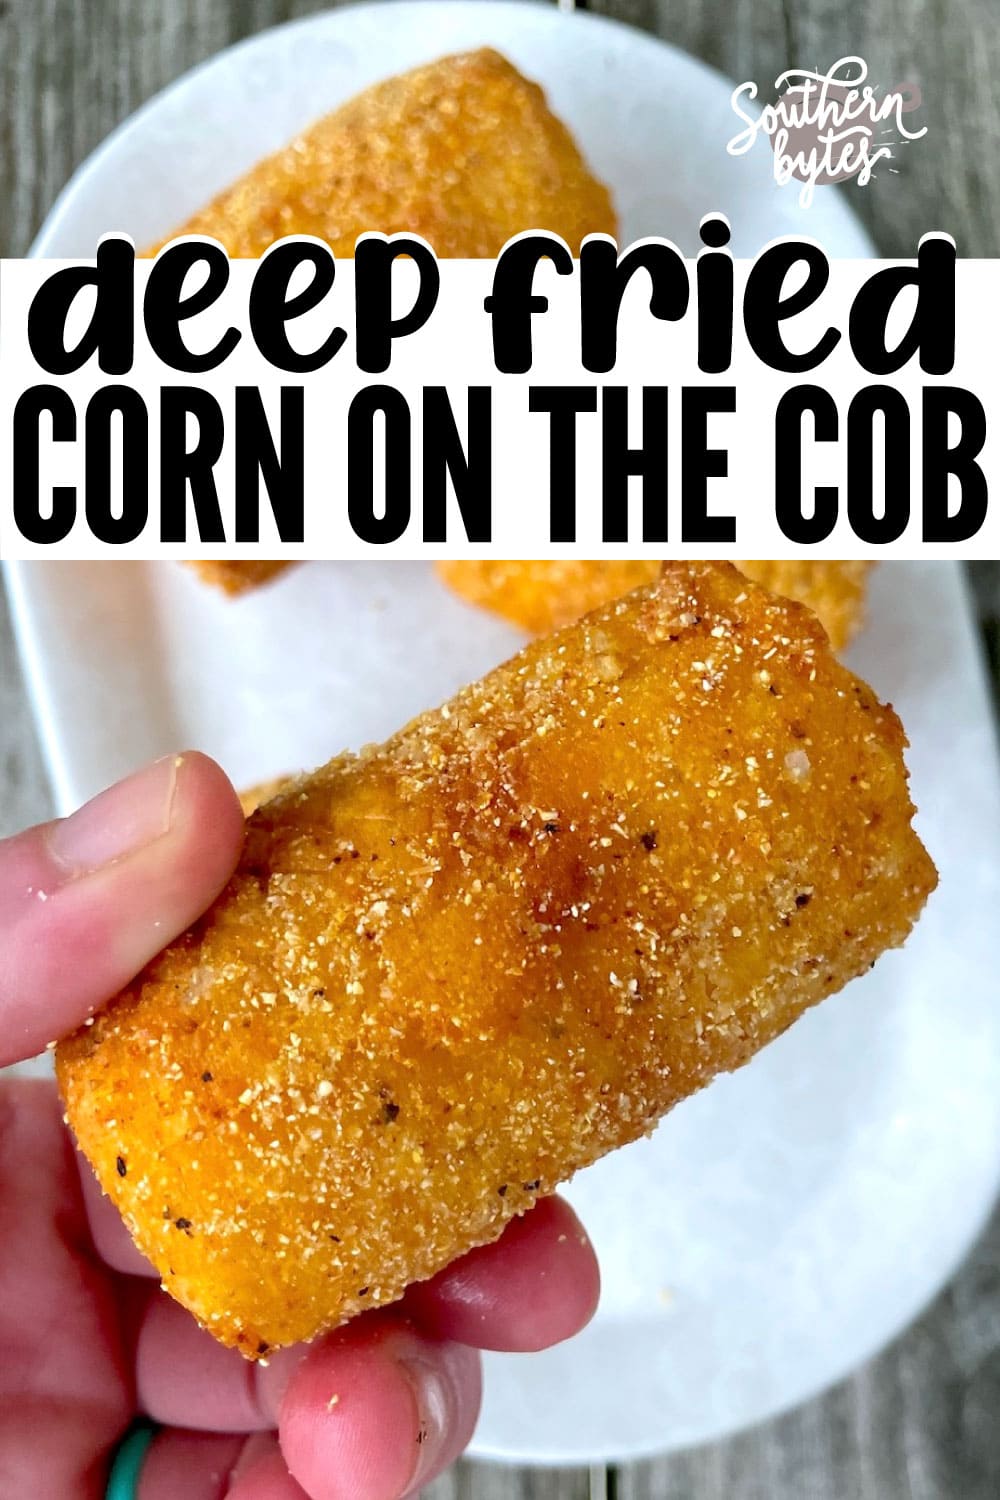 A pin image of a hand holding a piece of fried corn on the cob over a white plate.